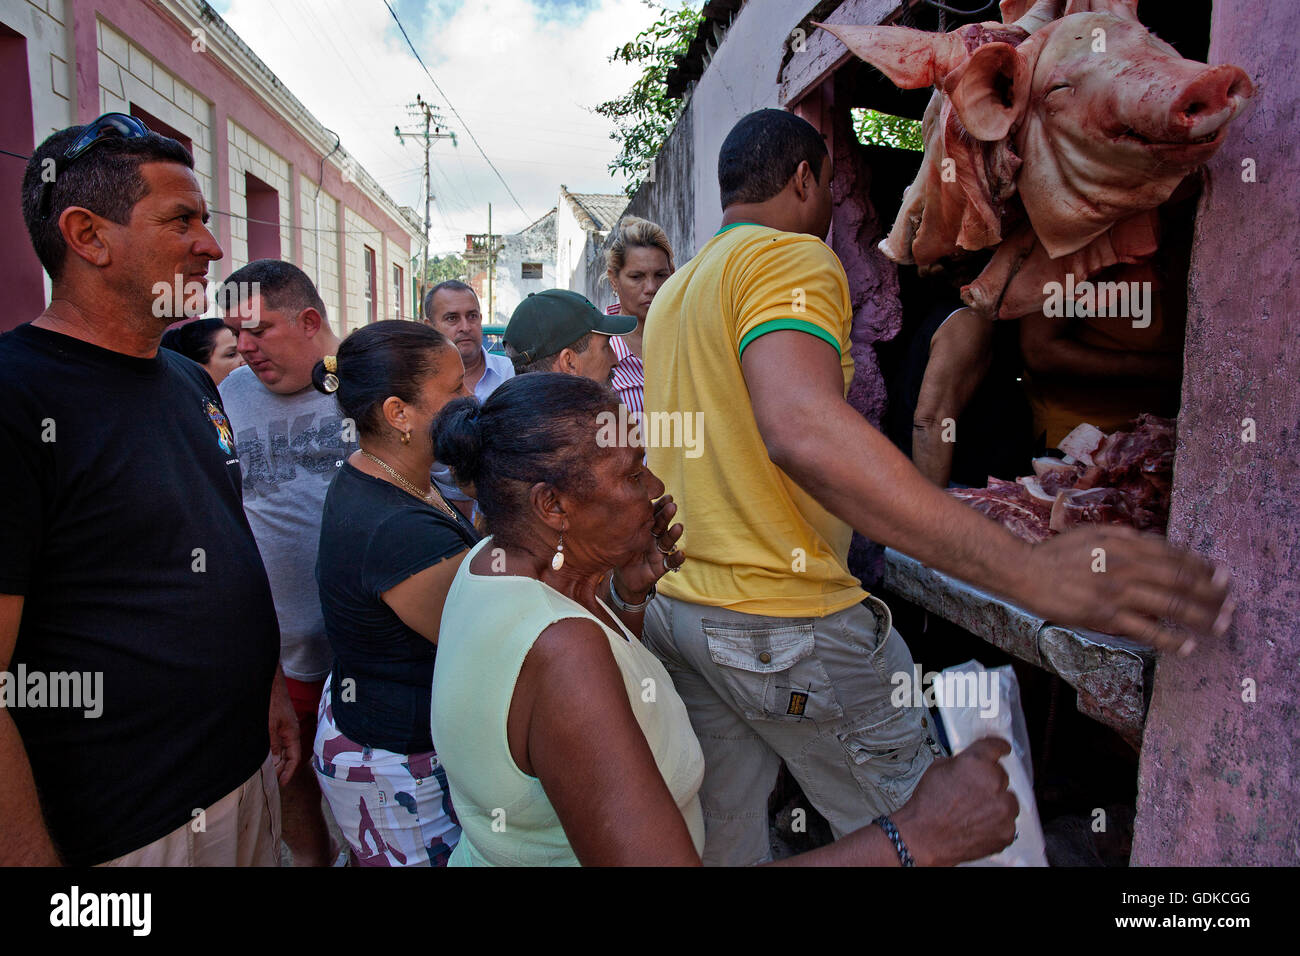 Locals at a sales stand with meat, on the street, Baracoa, Guantánamo Province, Cuba Stock Photo